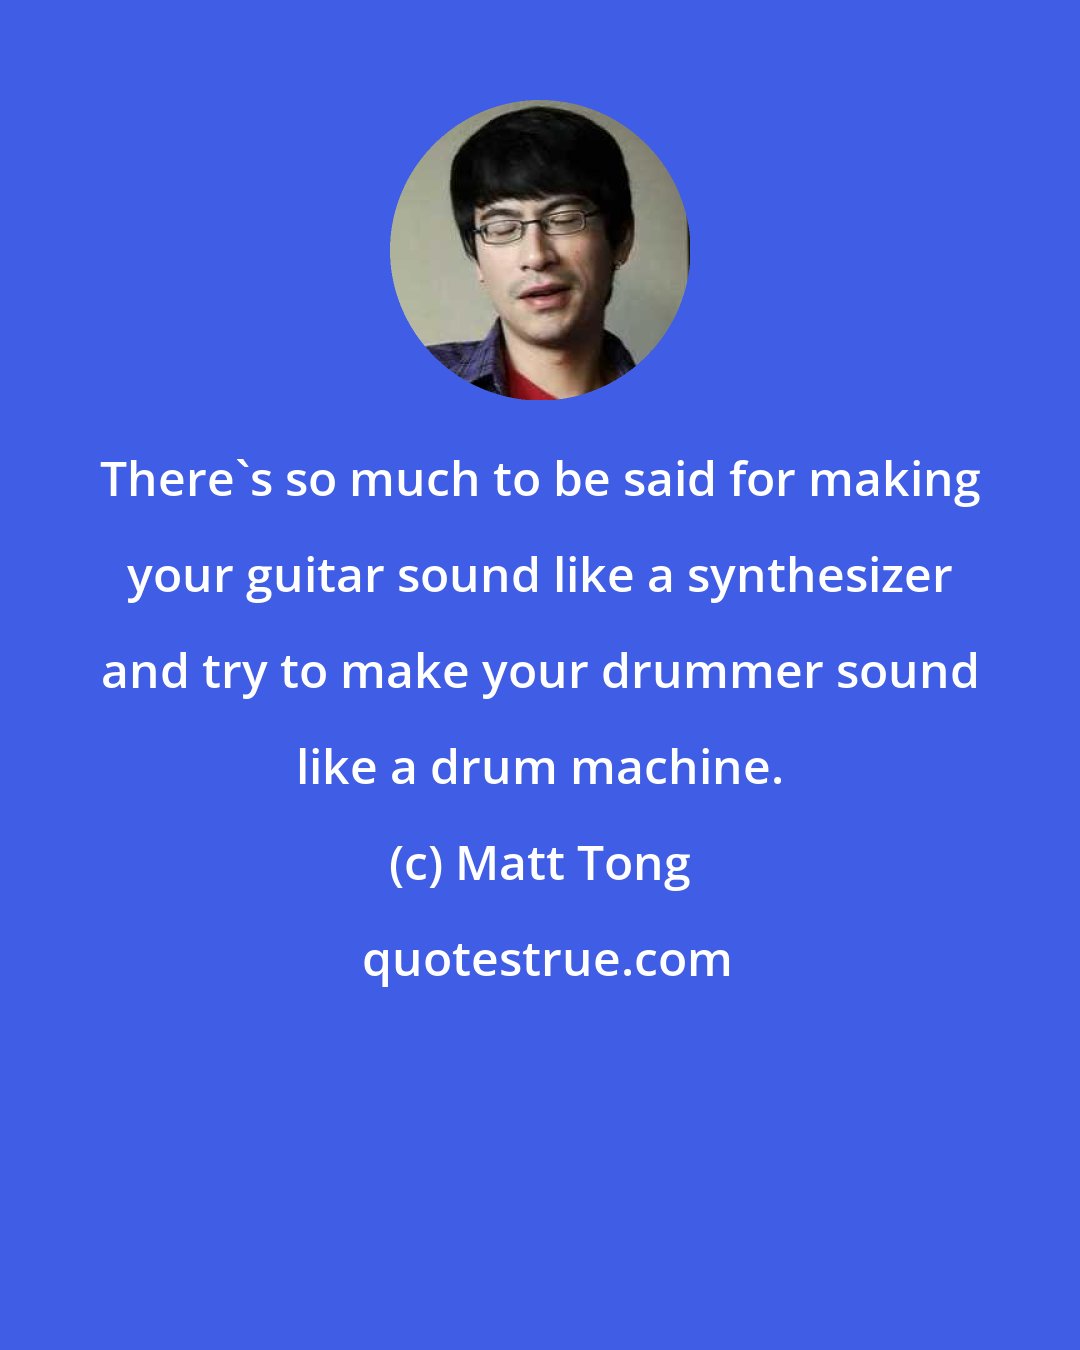 Matt Tong: There's so much to be said for making your guitar sound like a synthesizer and try to make your drummer sound like a drum machine.